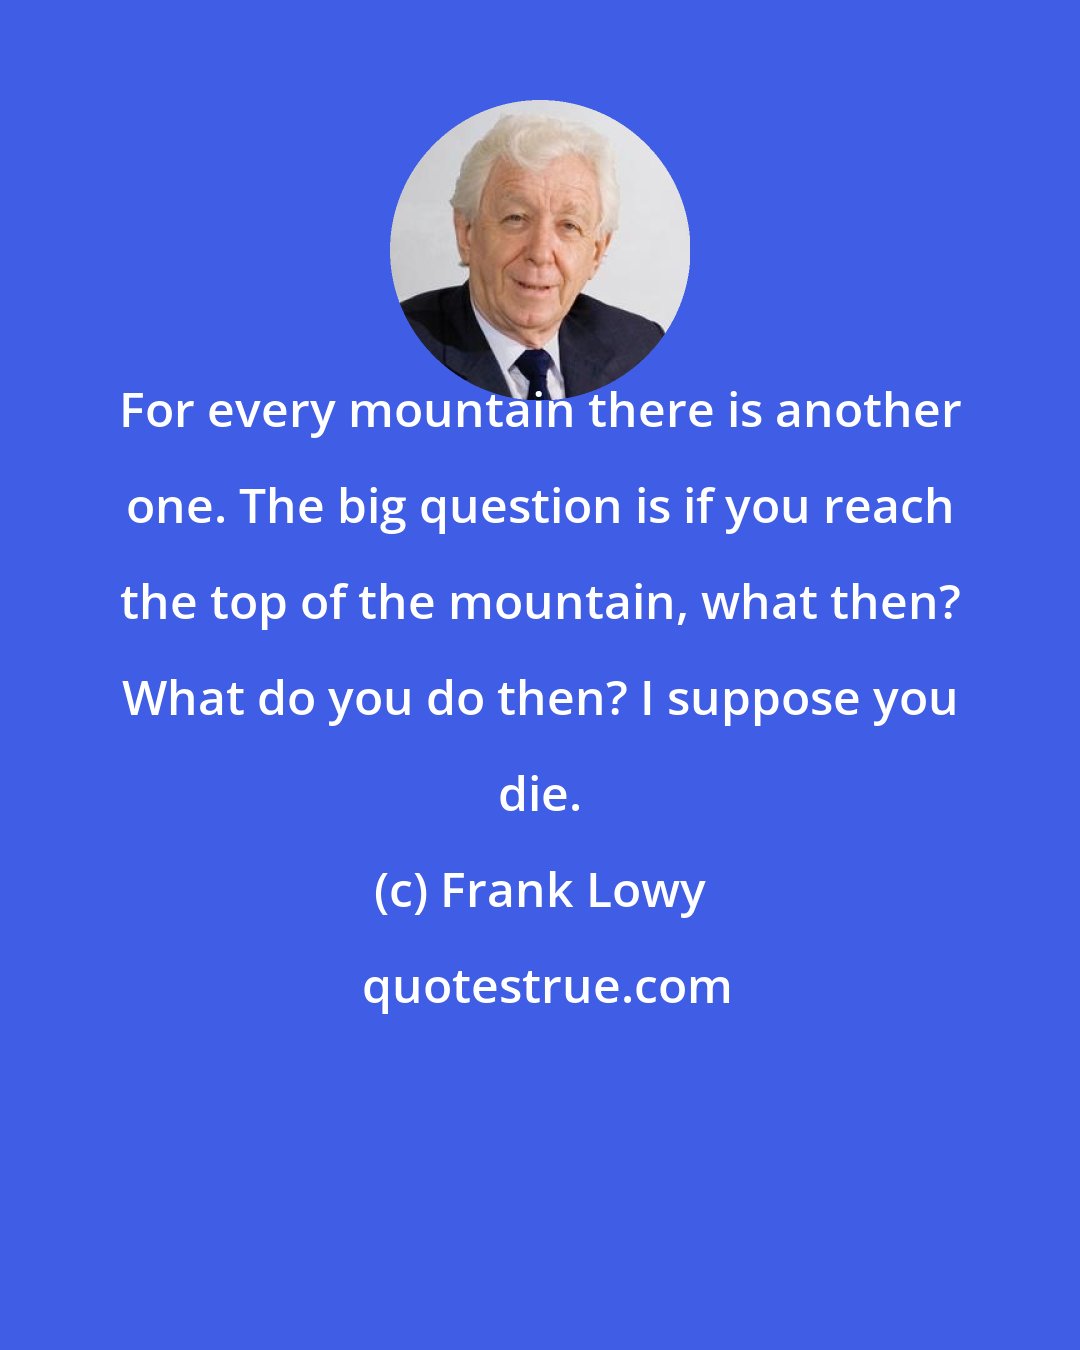 Frank Lowy: For every mountain there is another one. The big question is if you reach the top of the mountain, what then? What do you do then? I suppose you die.